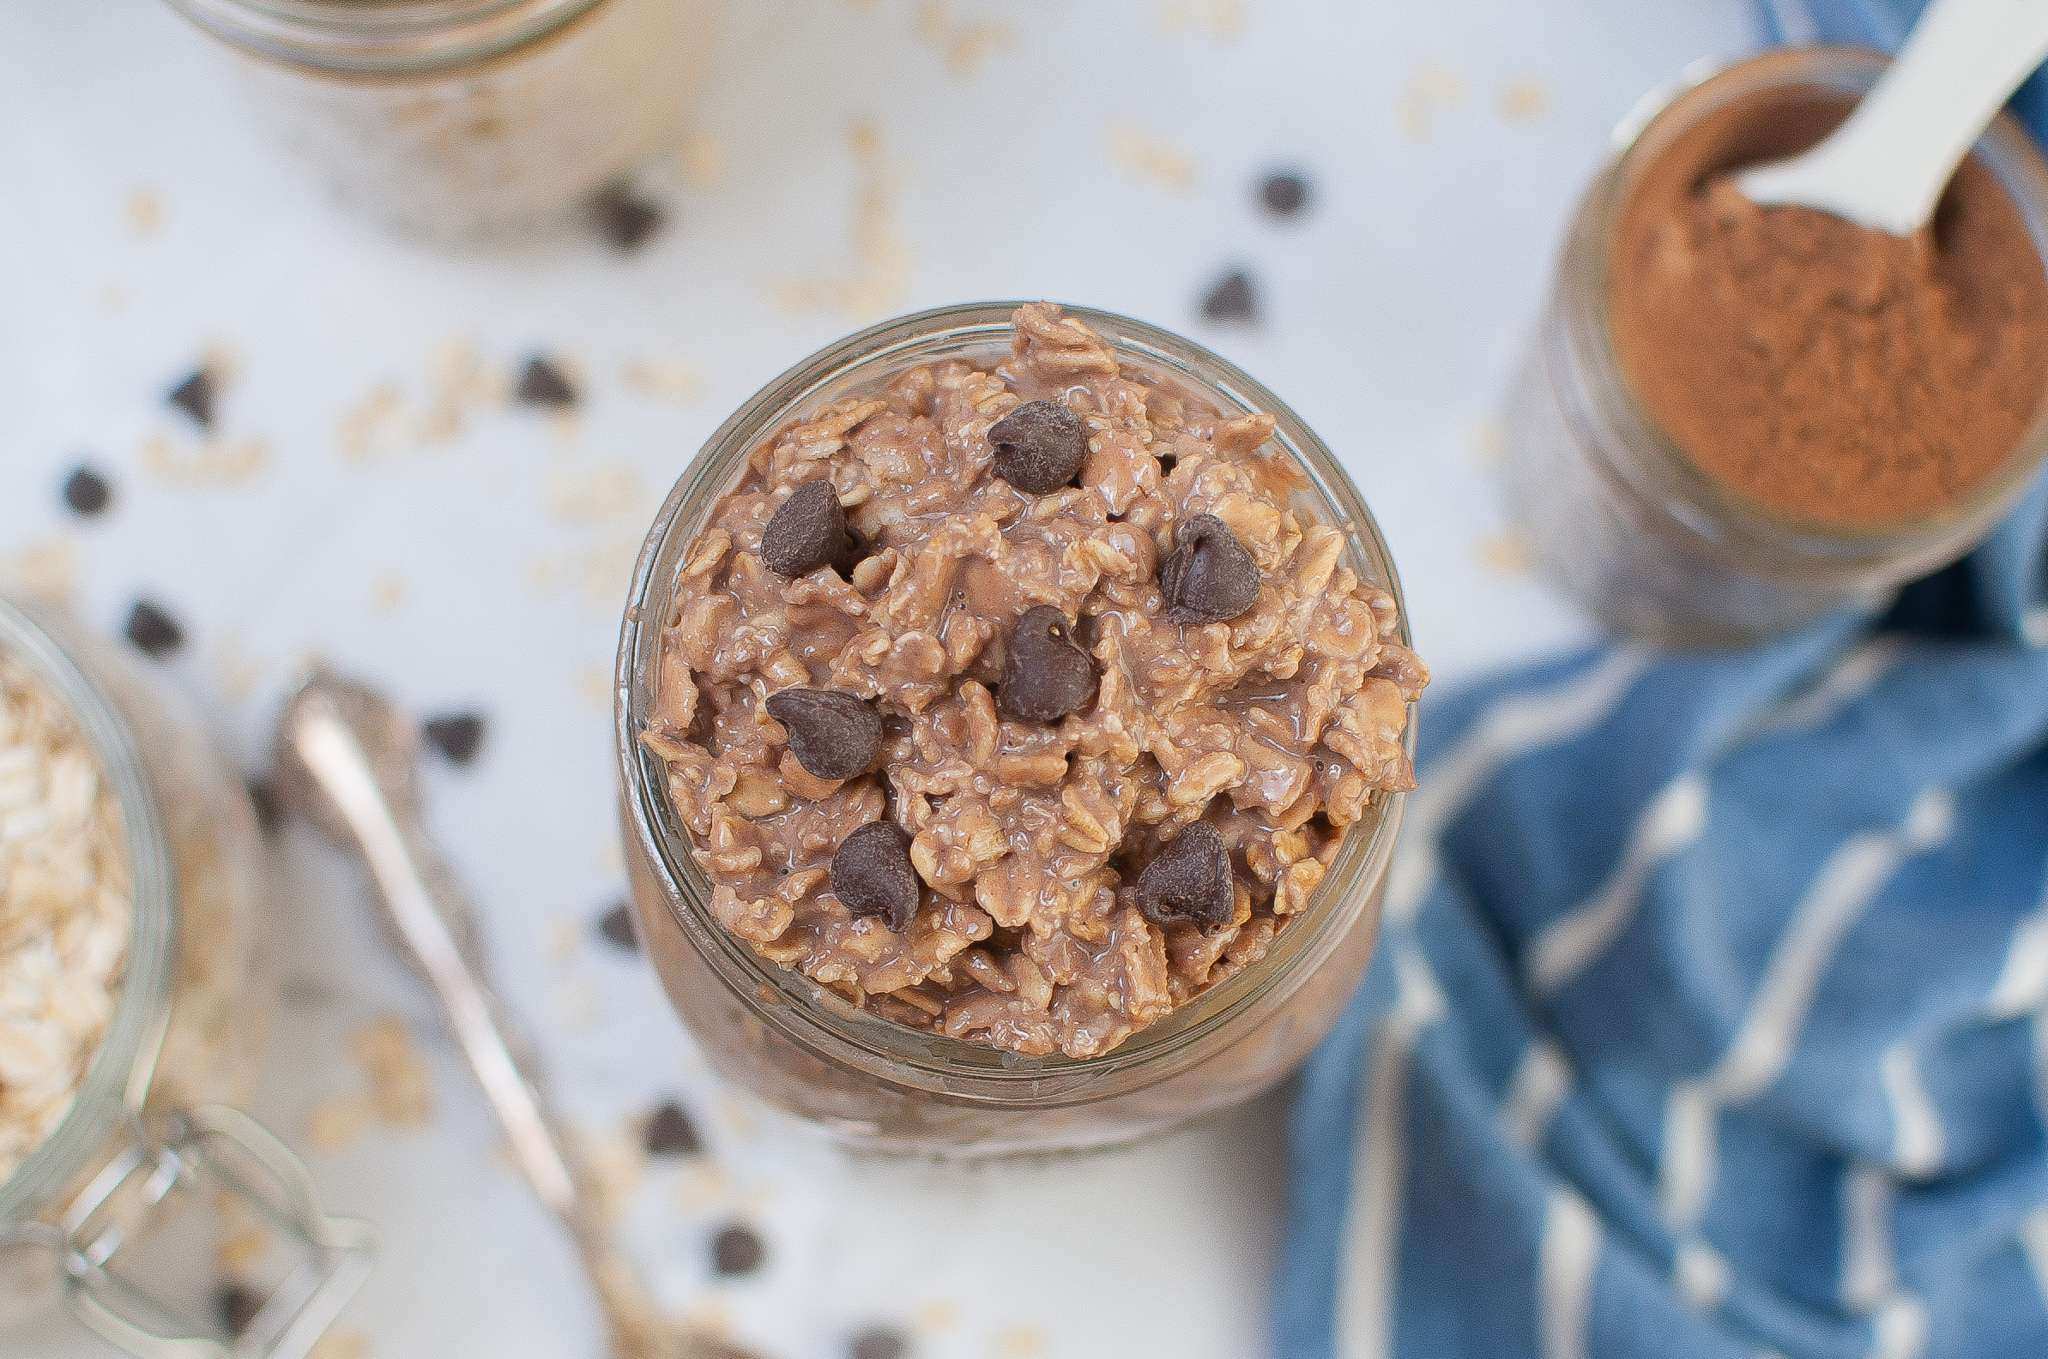 The BEST Chocolate Overnight Oats